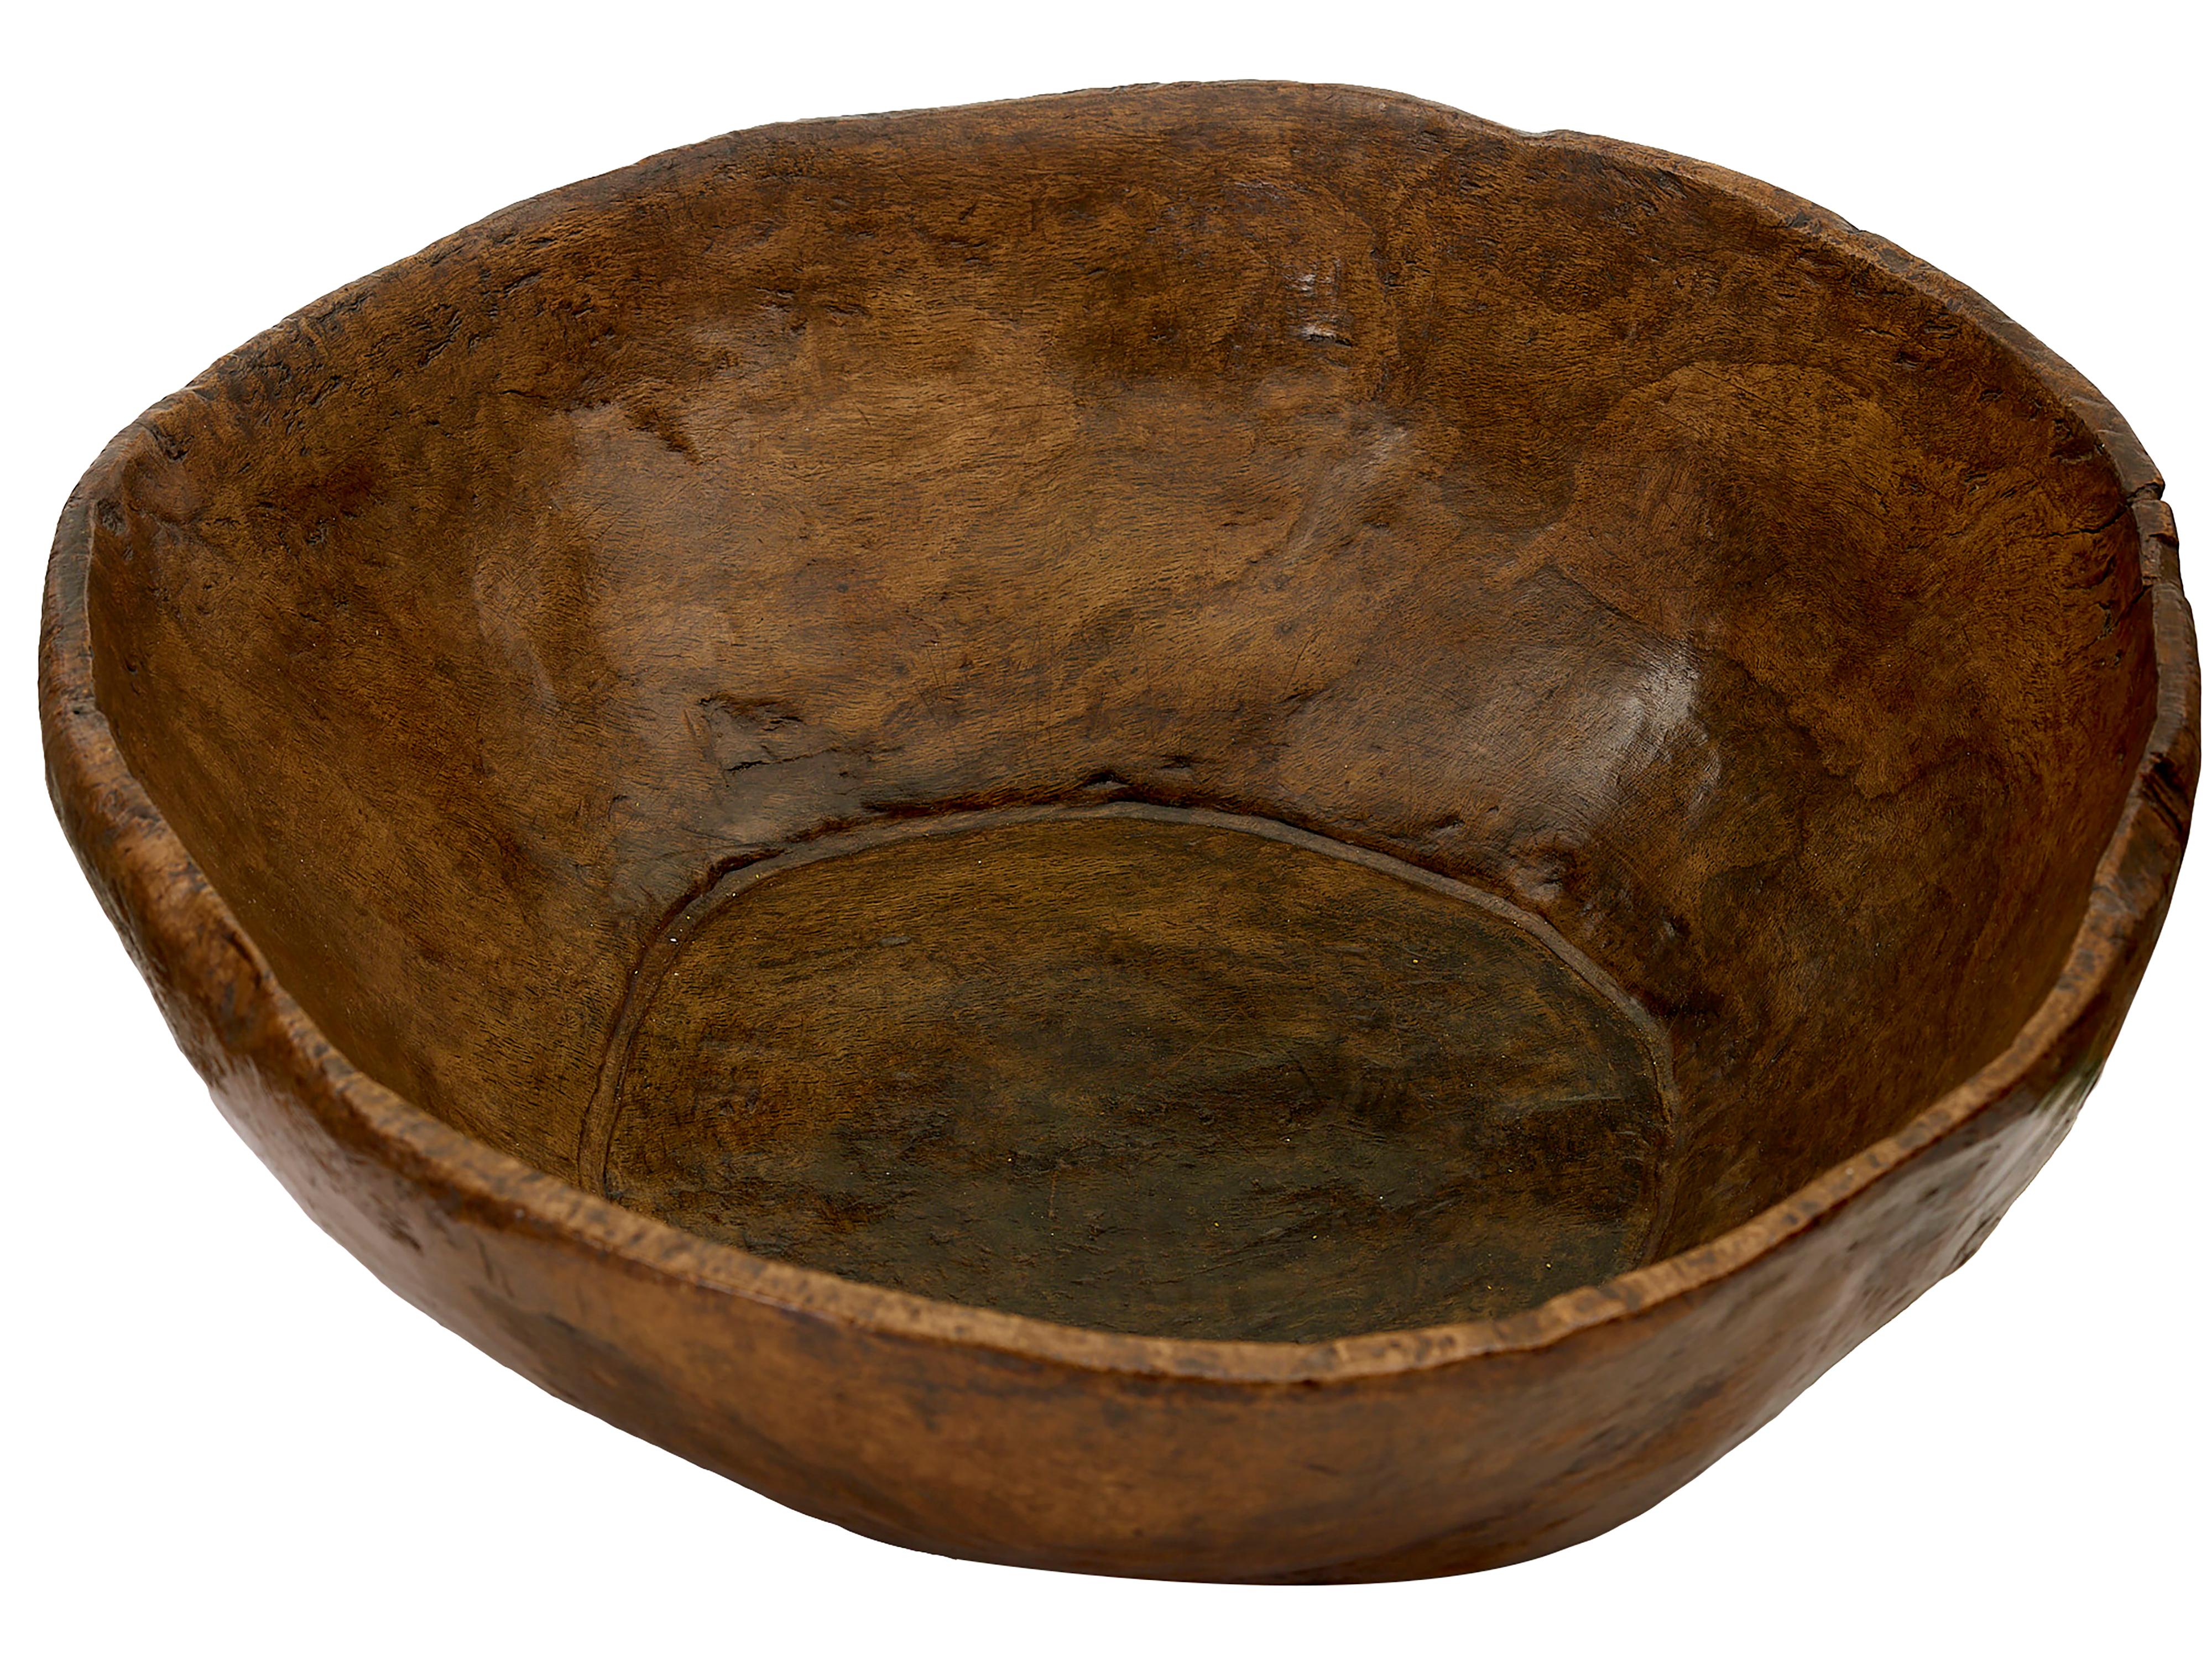 Massive heavy treen bowl. Rough hewn from one piece of walnut. Excellent natural colour. Hand polished rich patina. Mid 19th century. Traces of burning and wear underneath from stone hearth. Dia. 64cm, h 23cm.